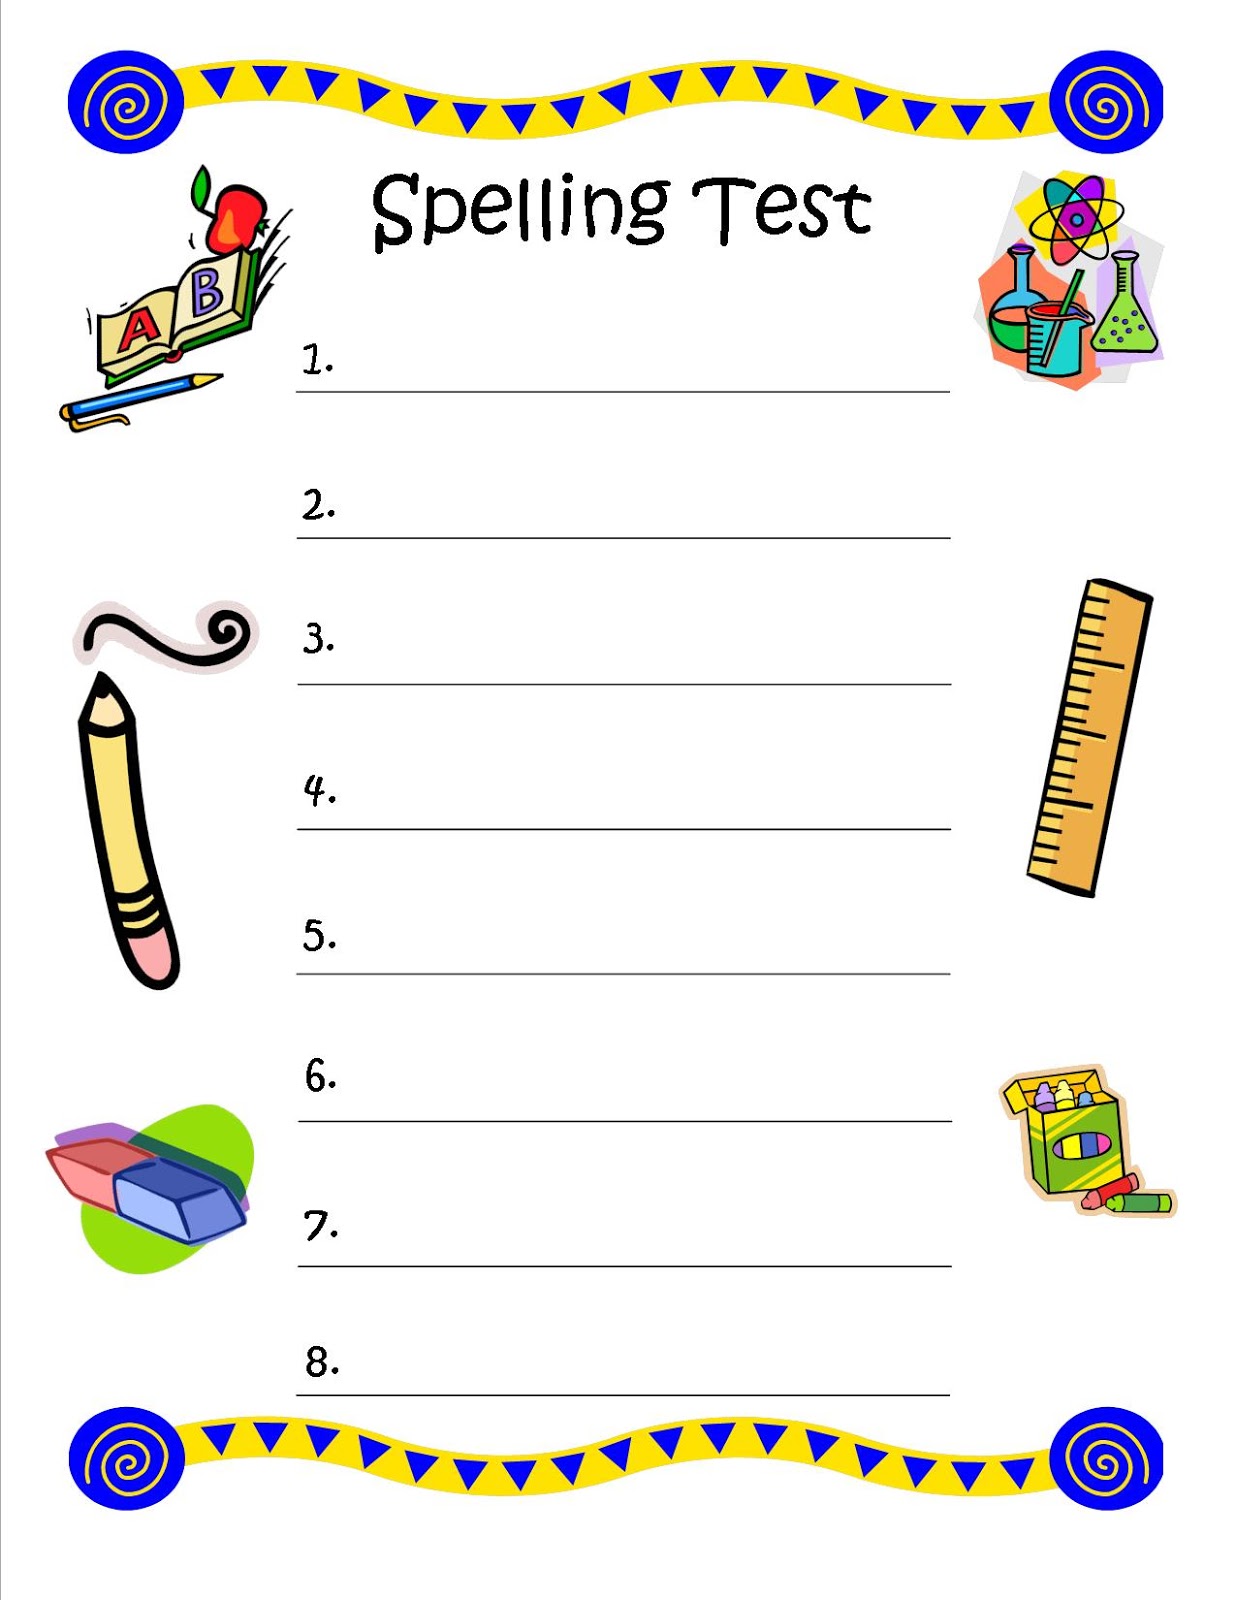 spelling-test-paper-printable-printable-word-searches